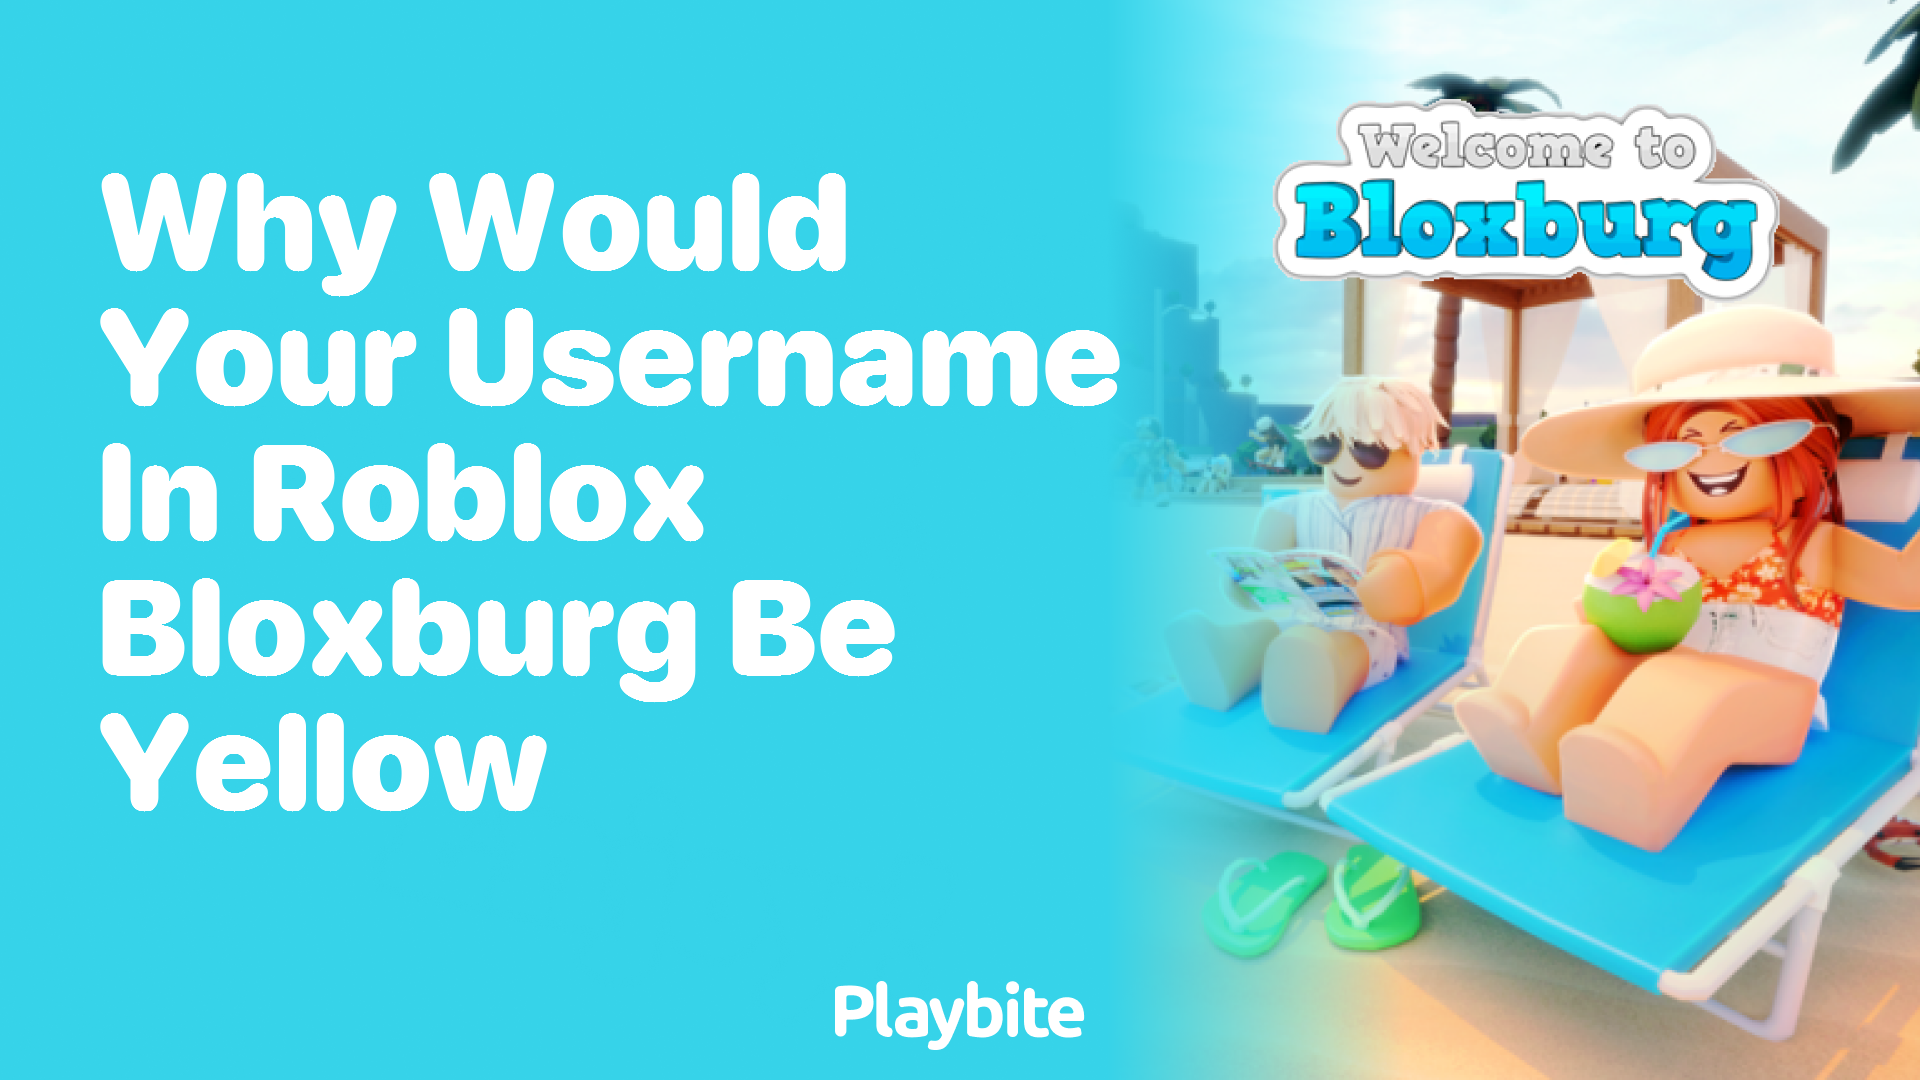 Why Would Your Username in Roblox Bloxburg Be Yellow?